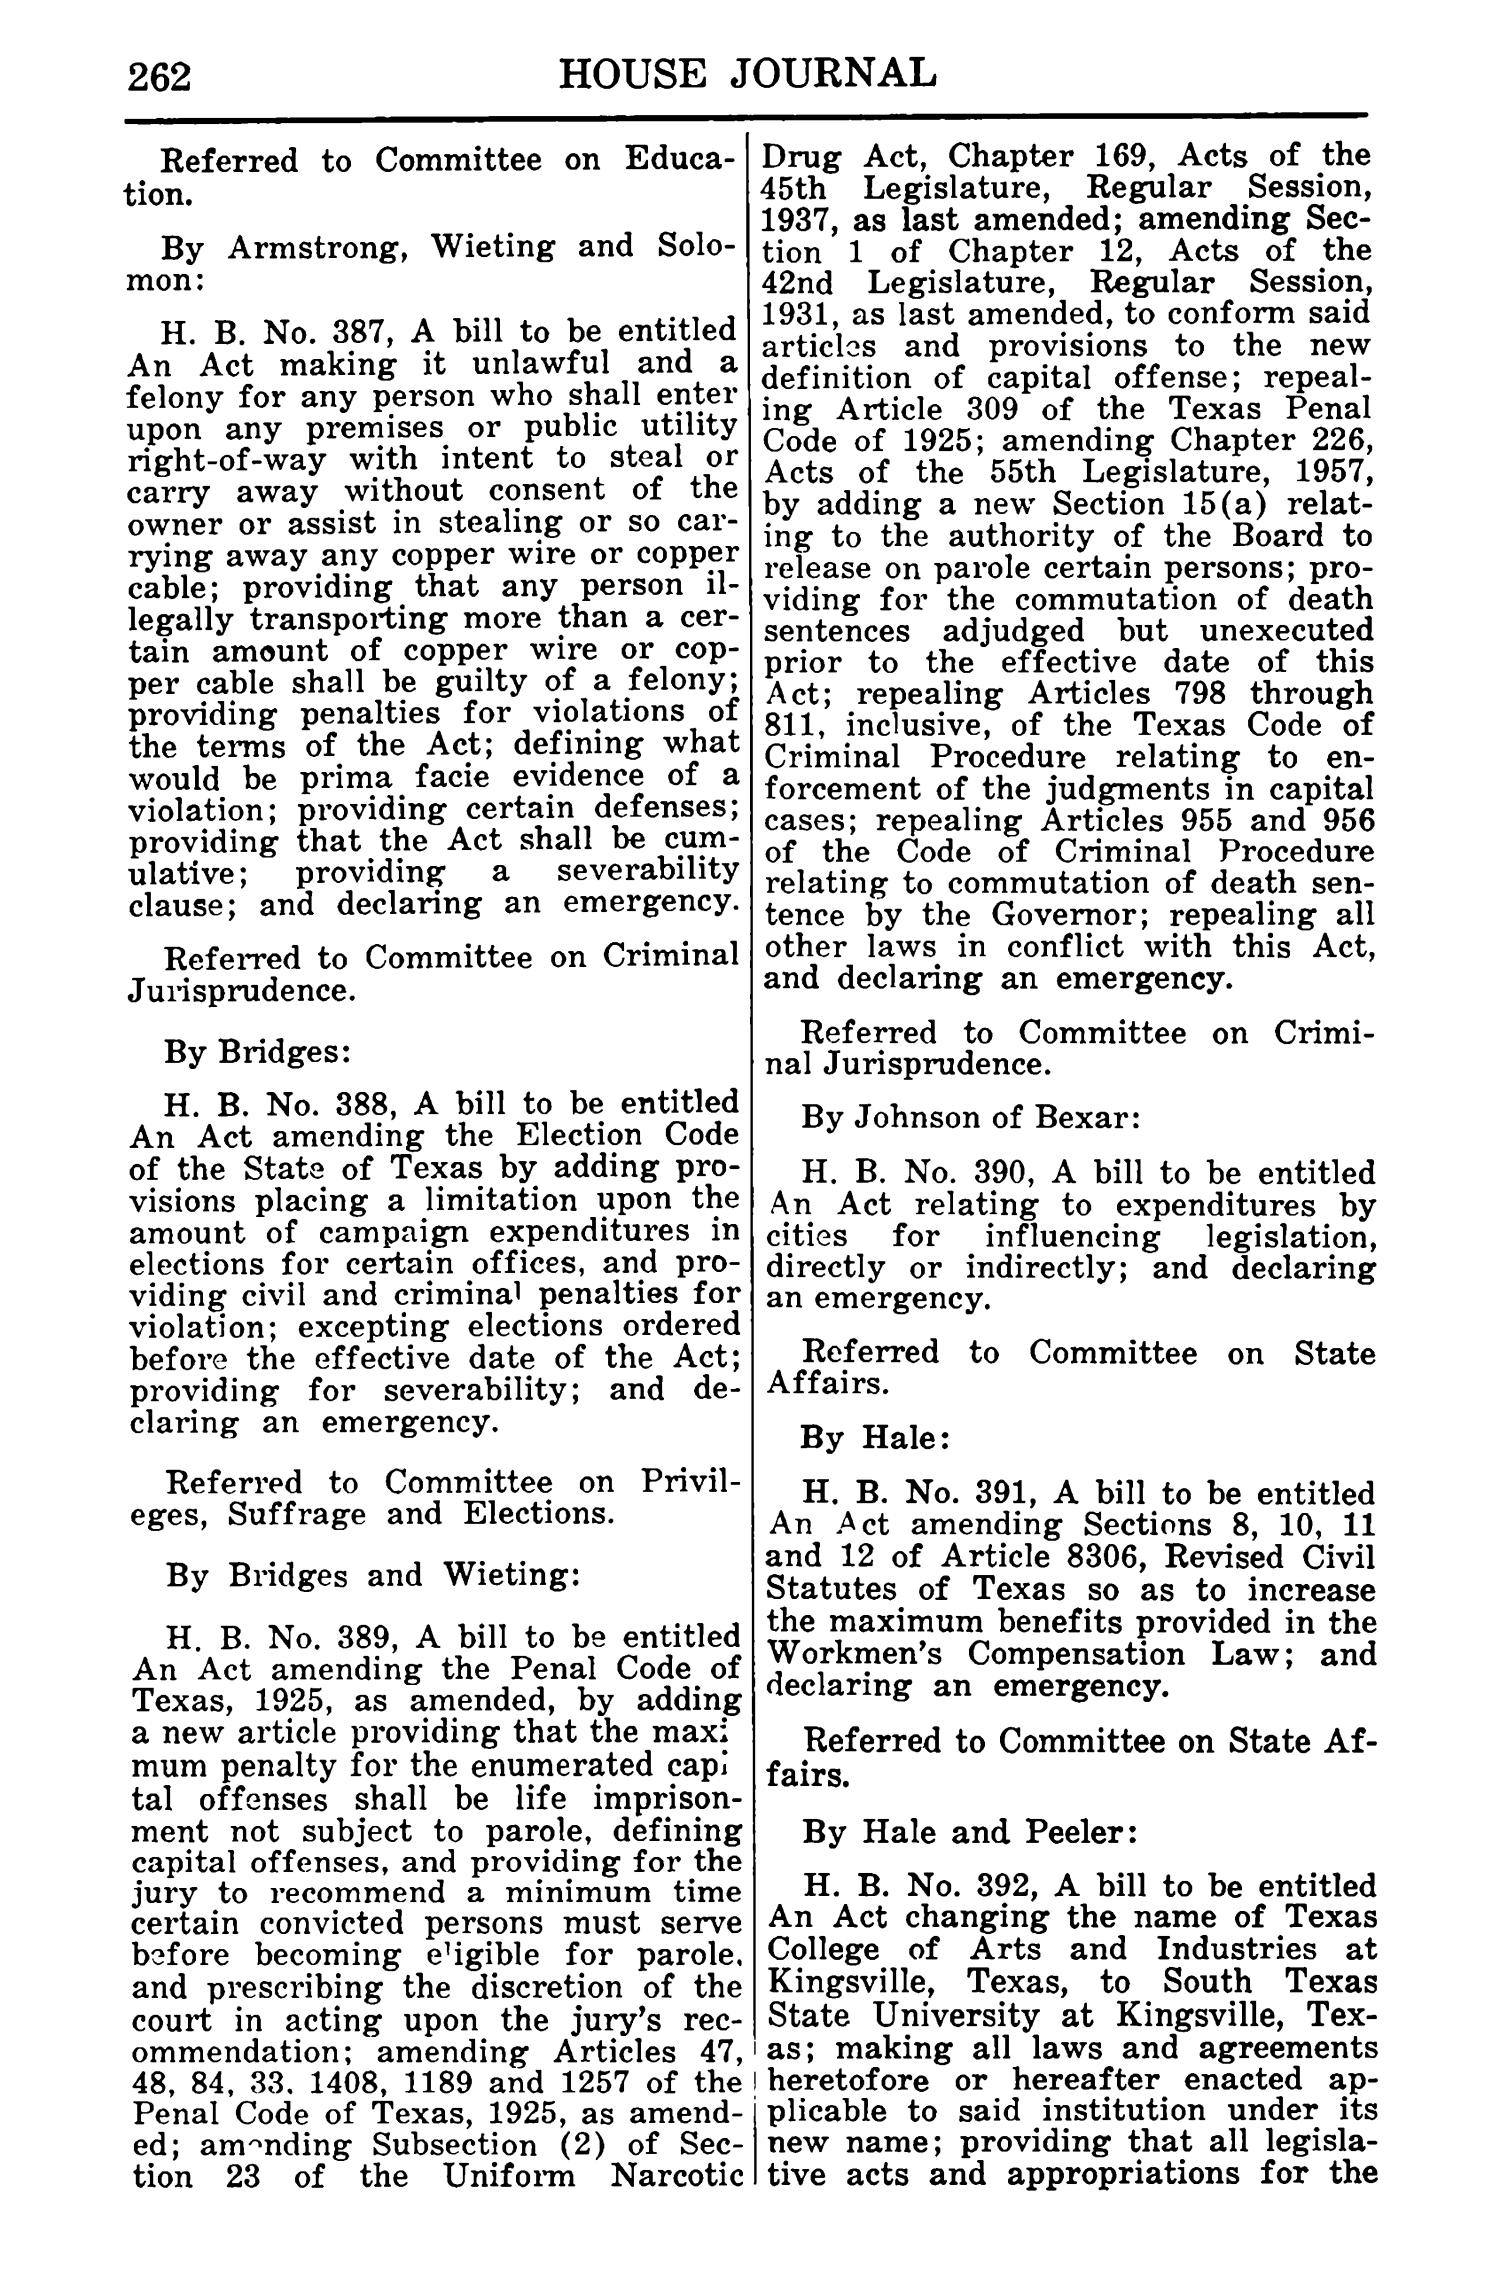 Journal of the House of Representatives of the Regular Session of the Sixtieth Legislature of the State of Texas, Volume 1
                                                
                                                    262
                                                